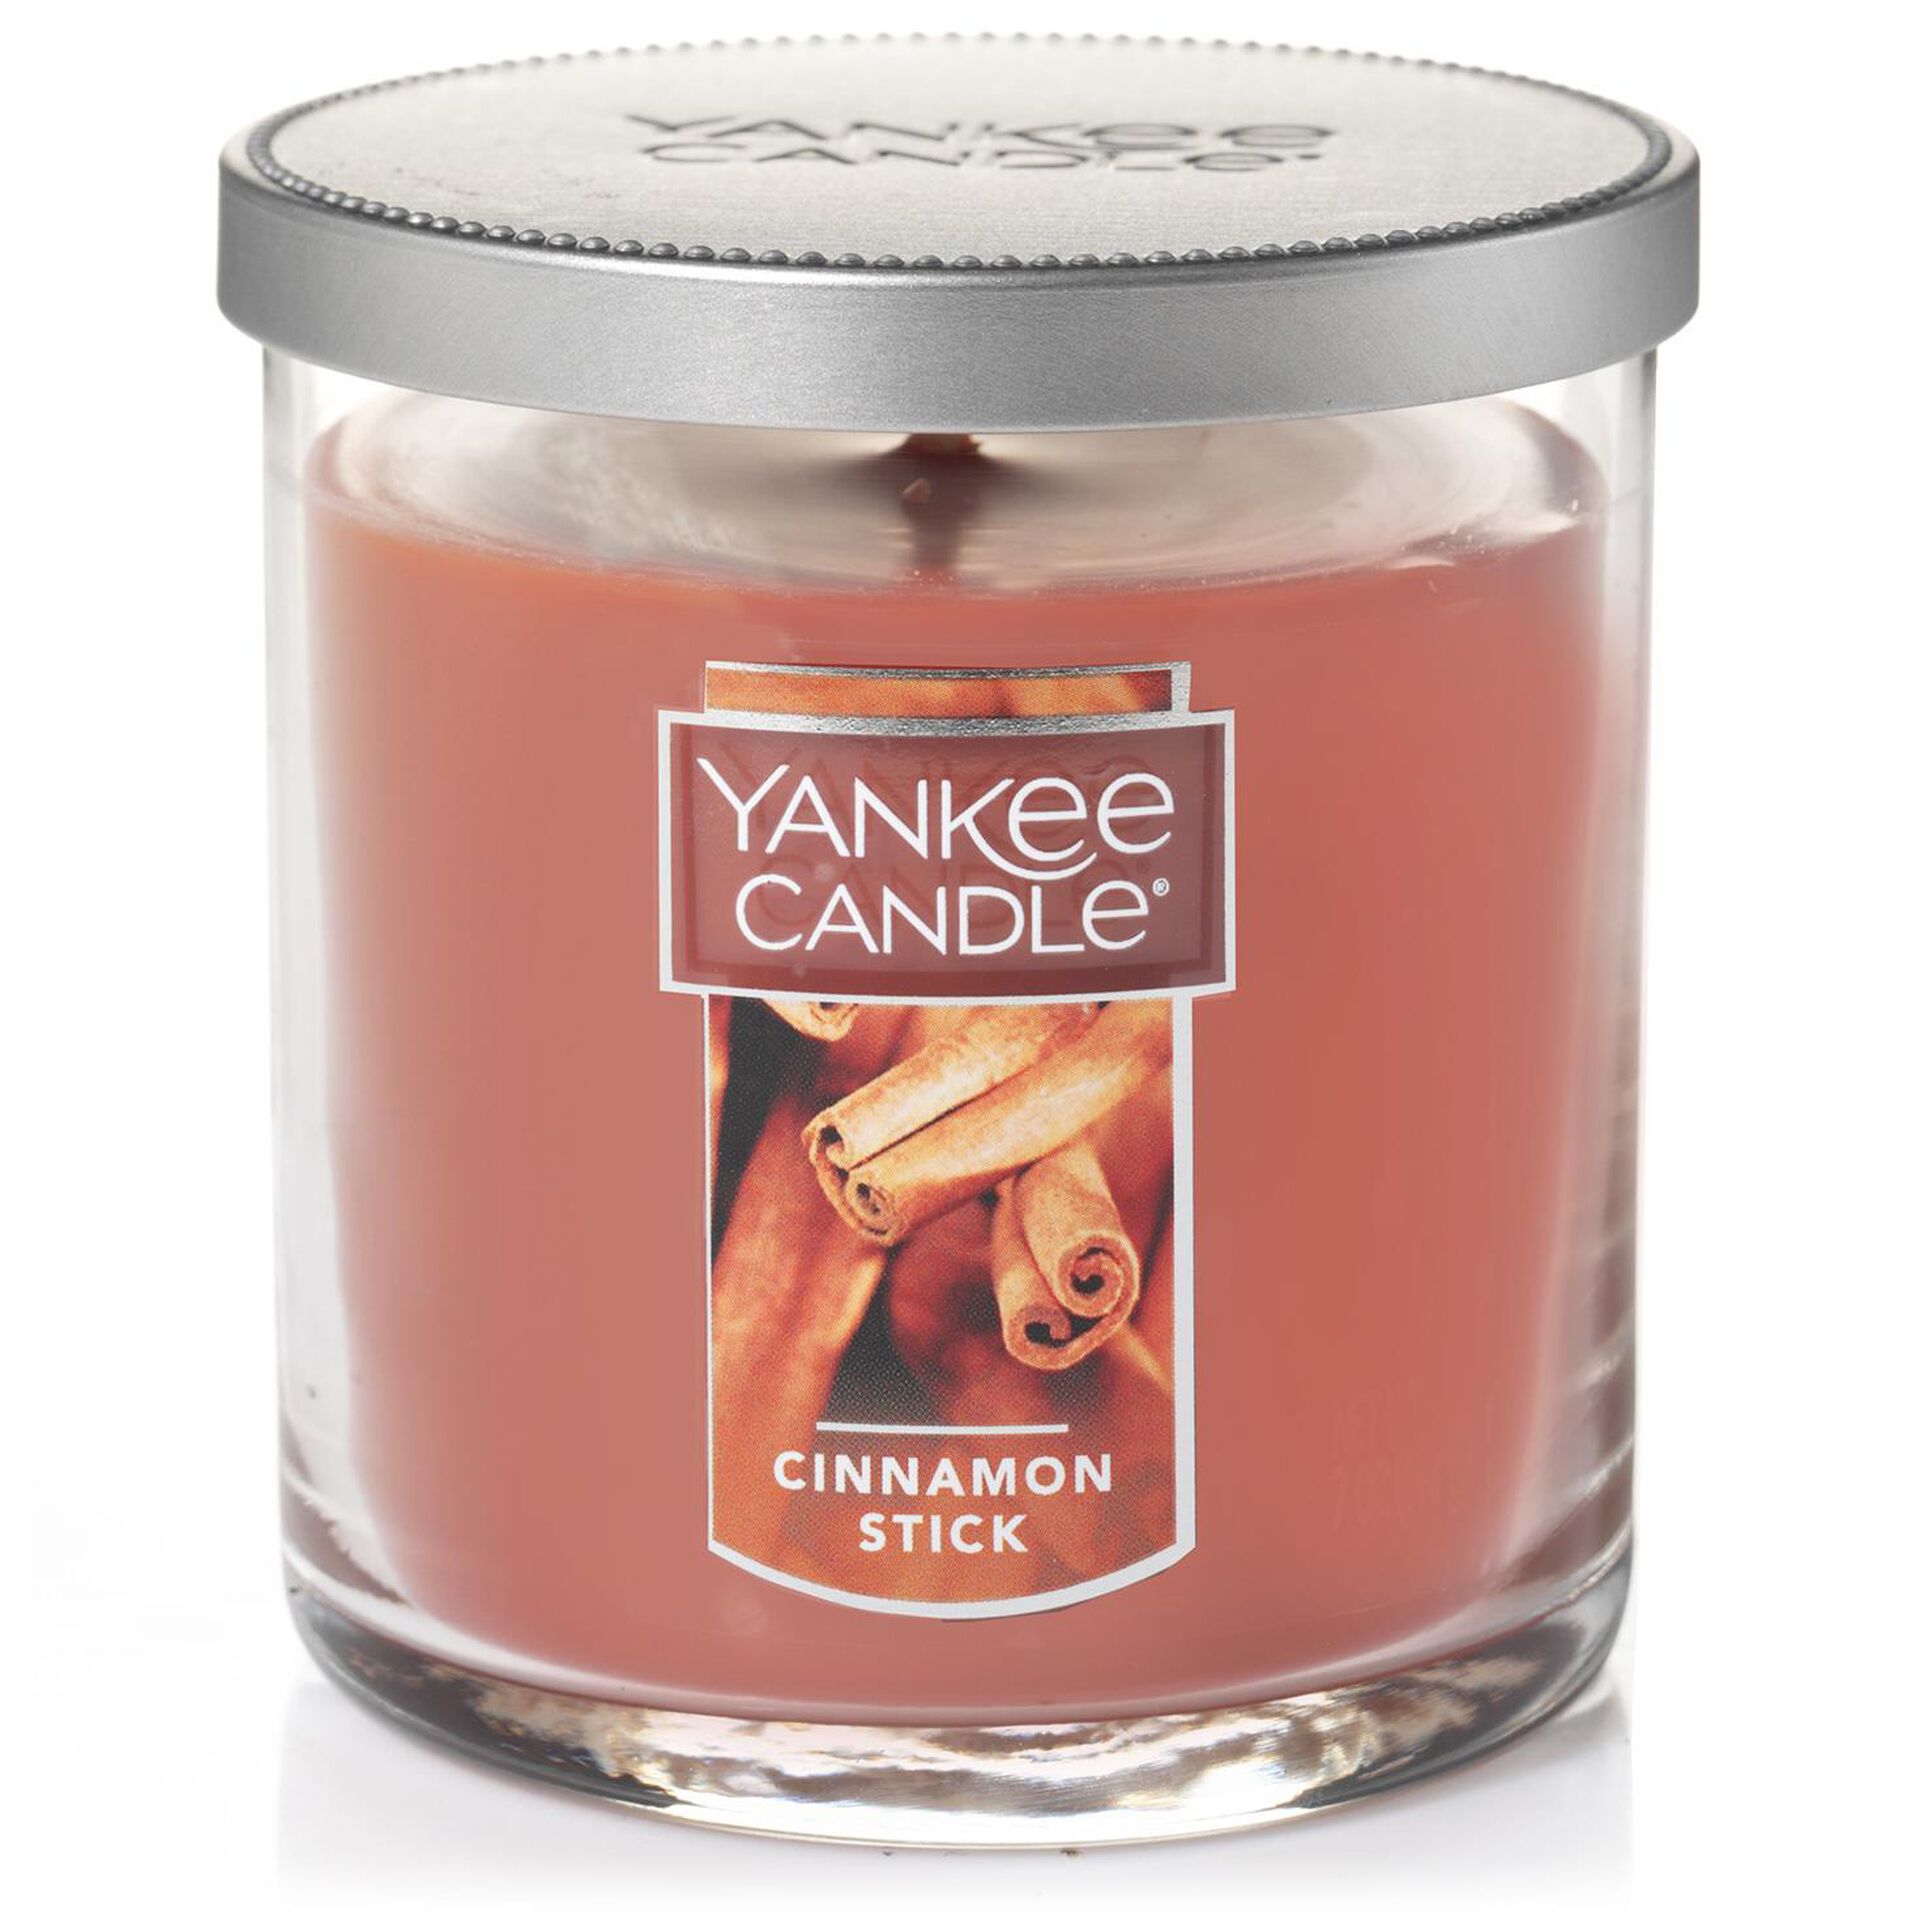 Cinnamon Stick Small Jar Candle by Yankee Candle® - Candles - Hallmark